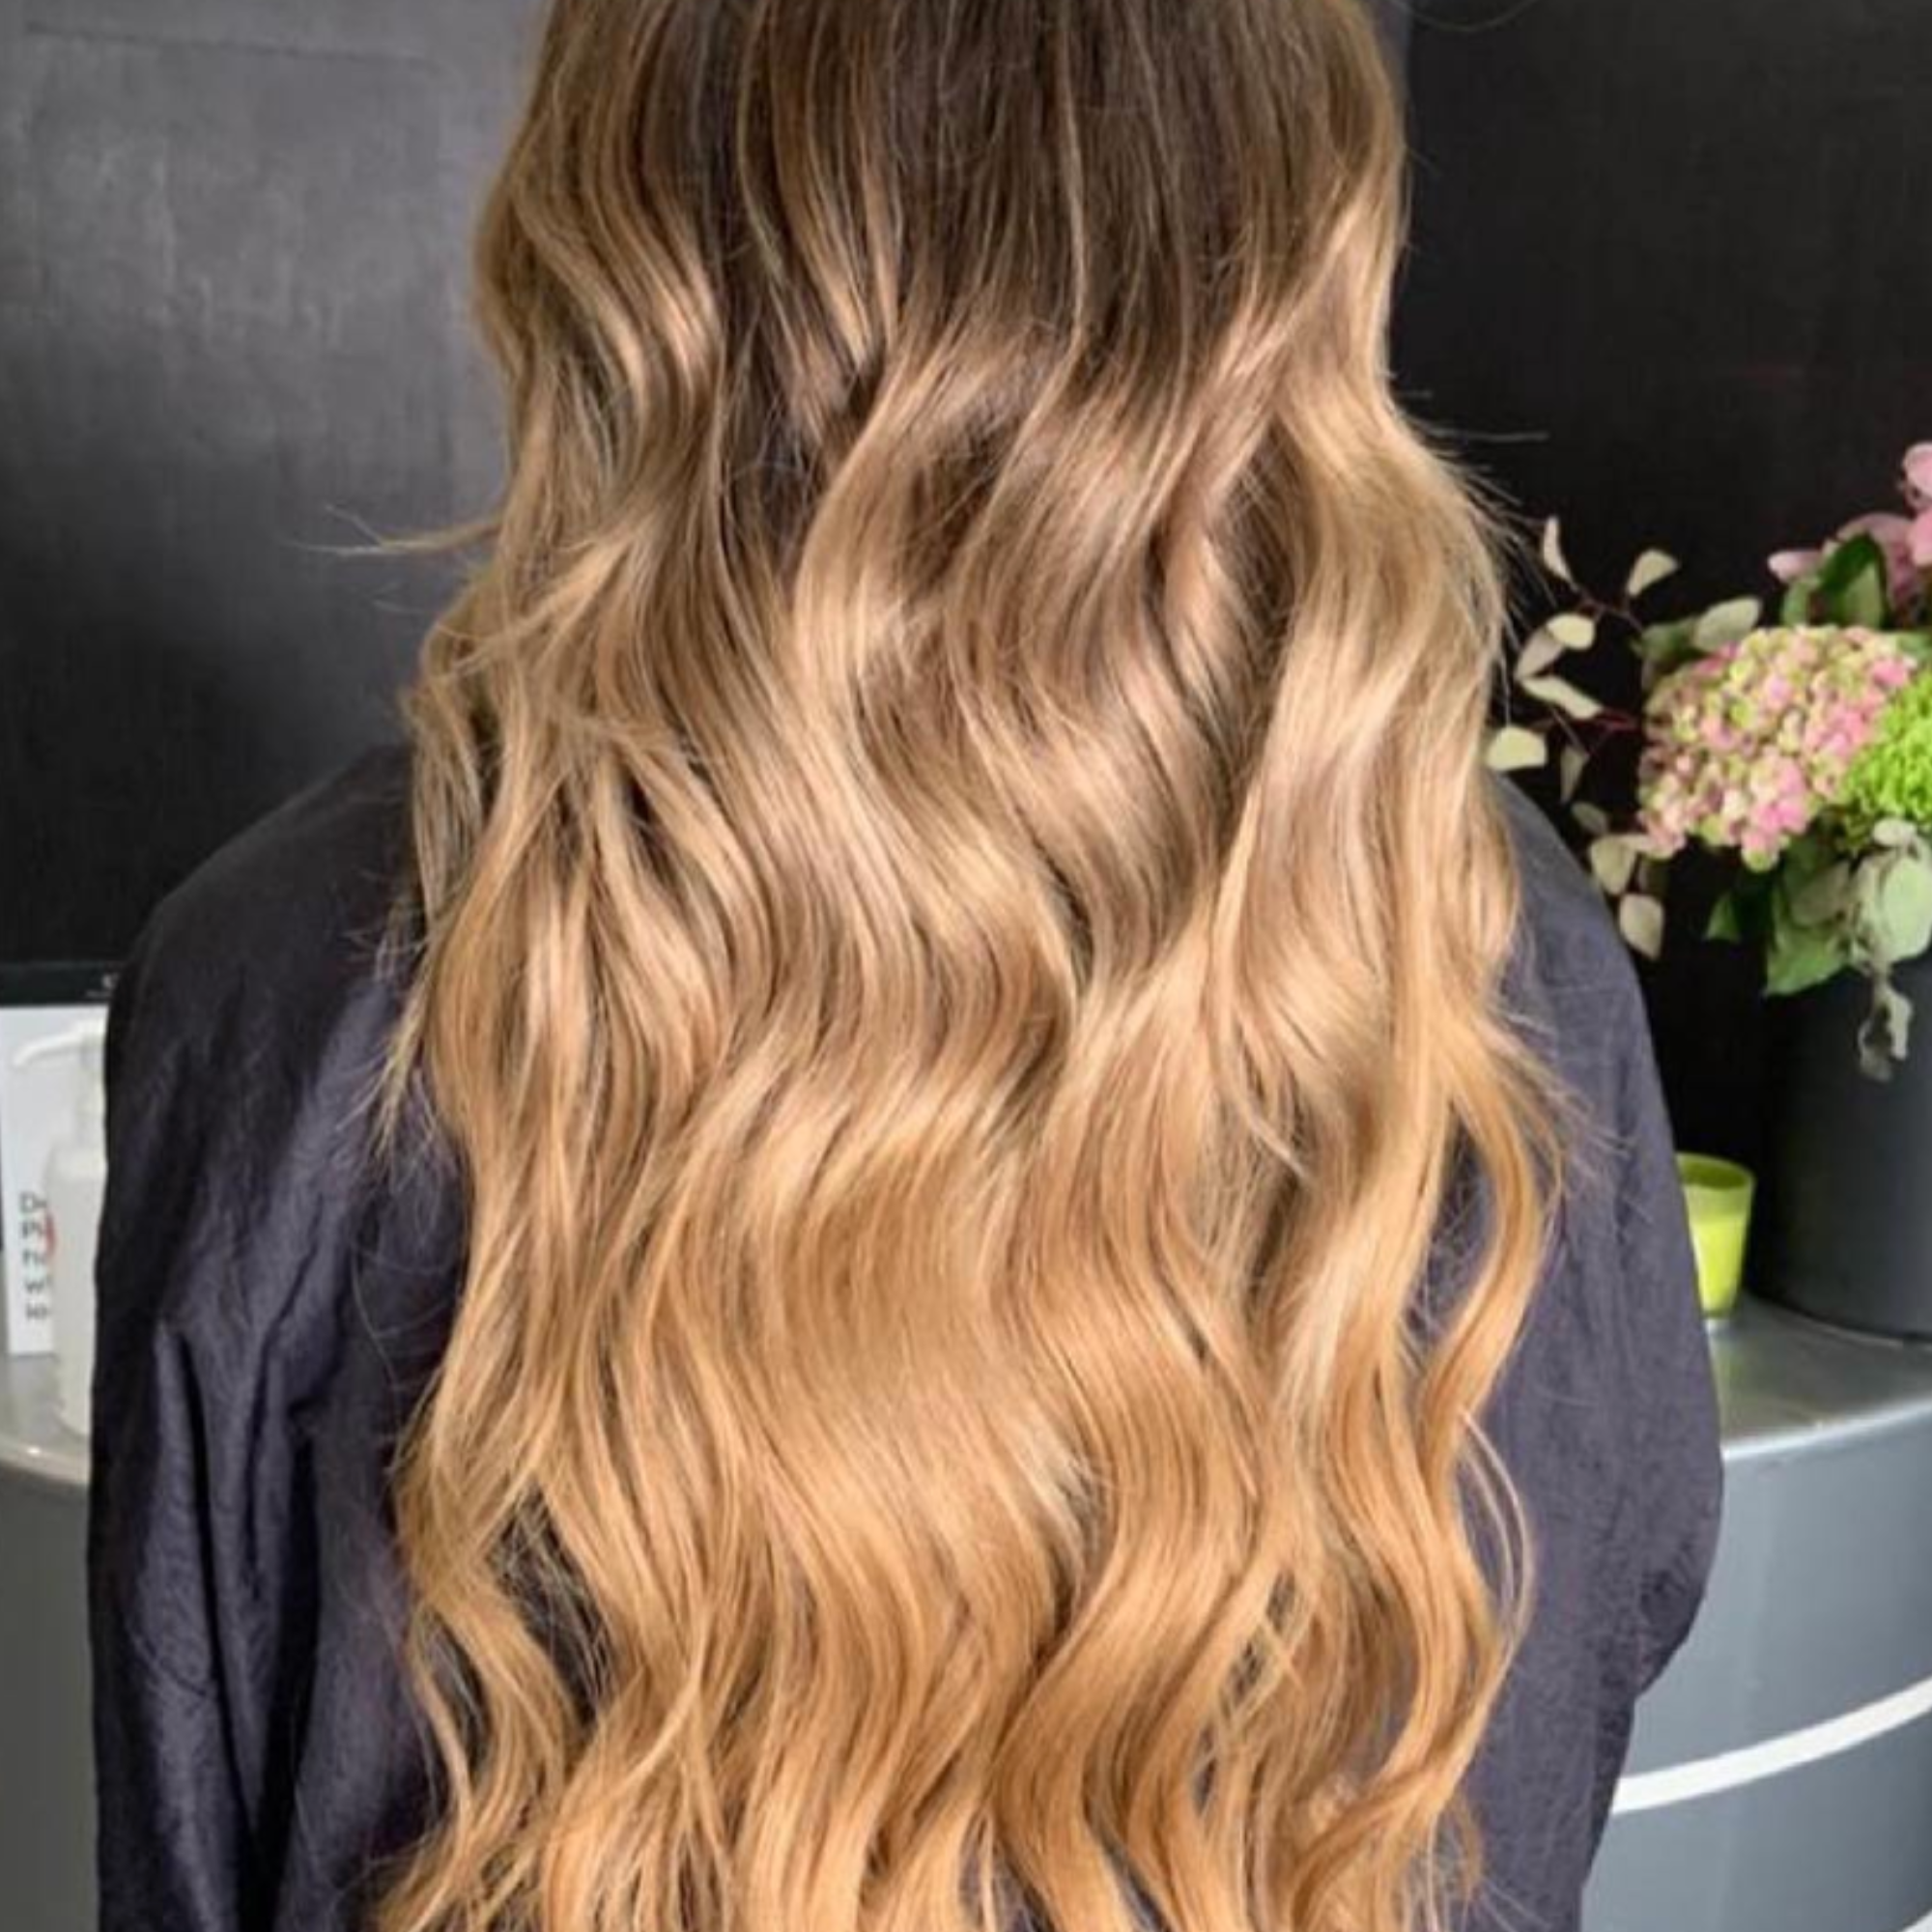 14" Invisible Tape Extensions Rooted Boho